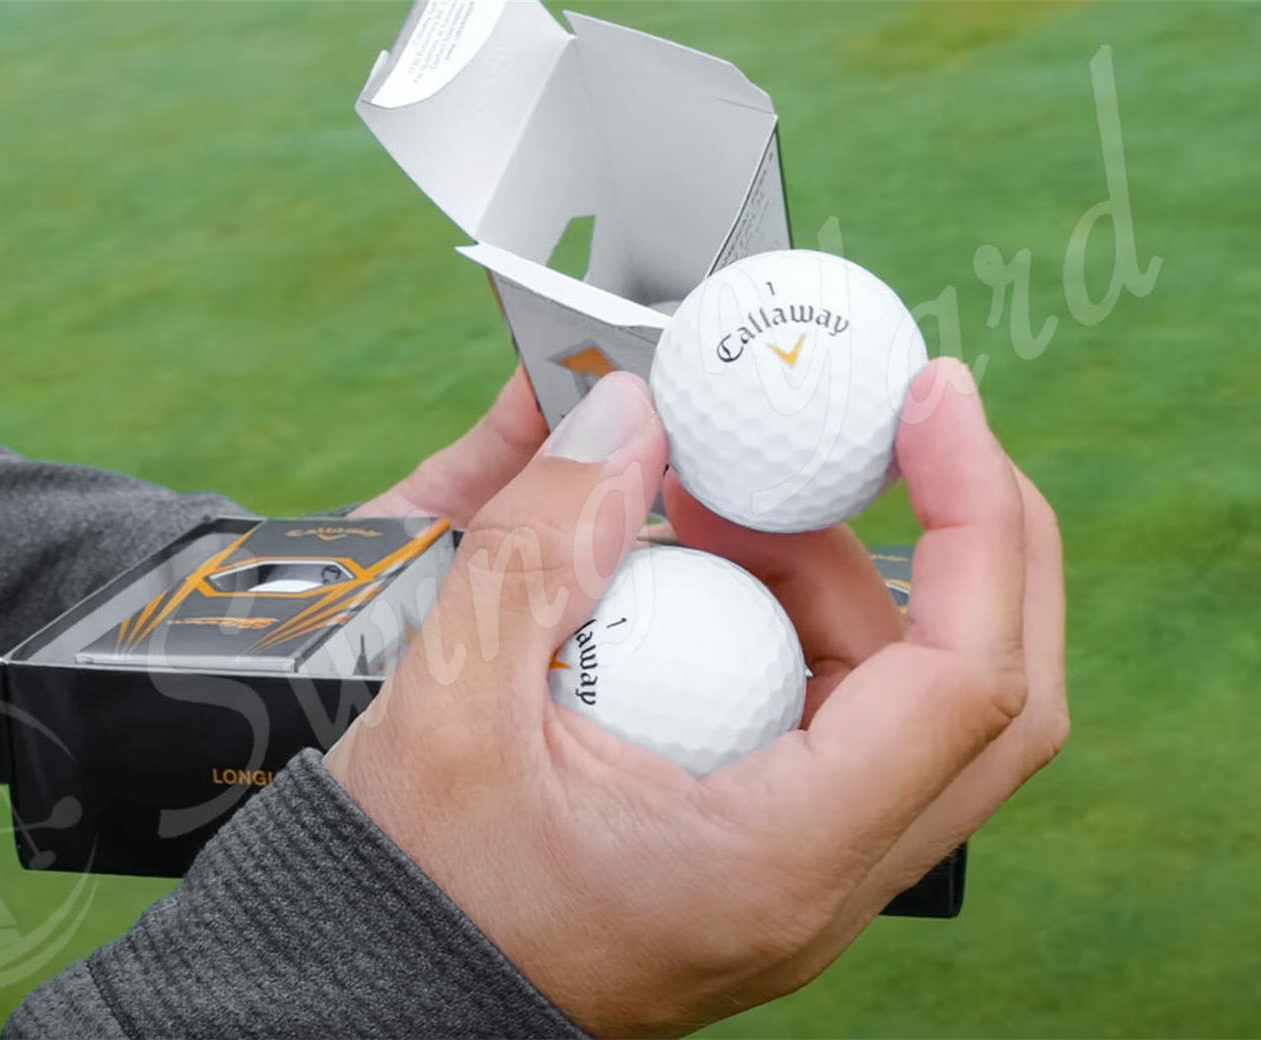 Me getting Callaway Warbird balls inside the pack for testing